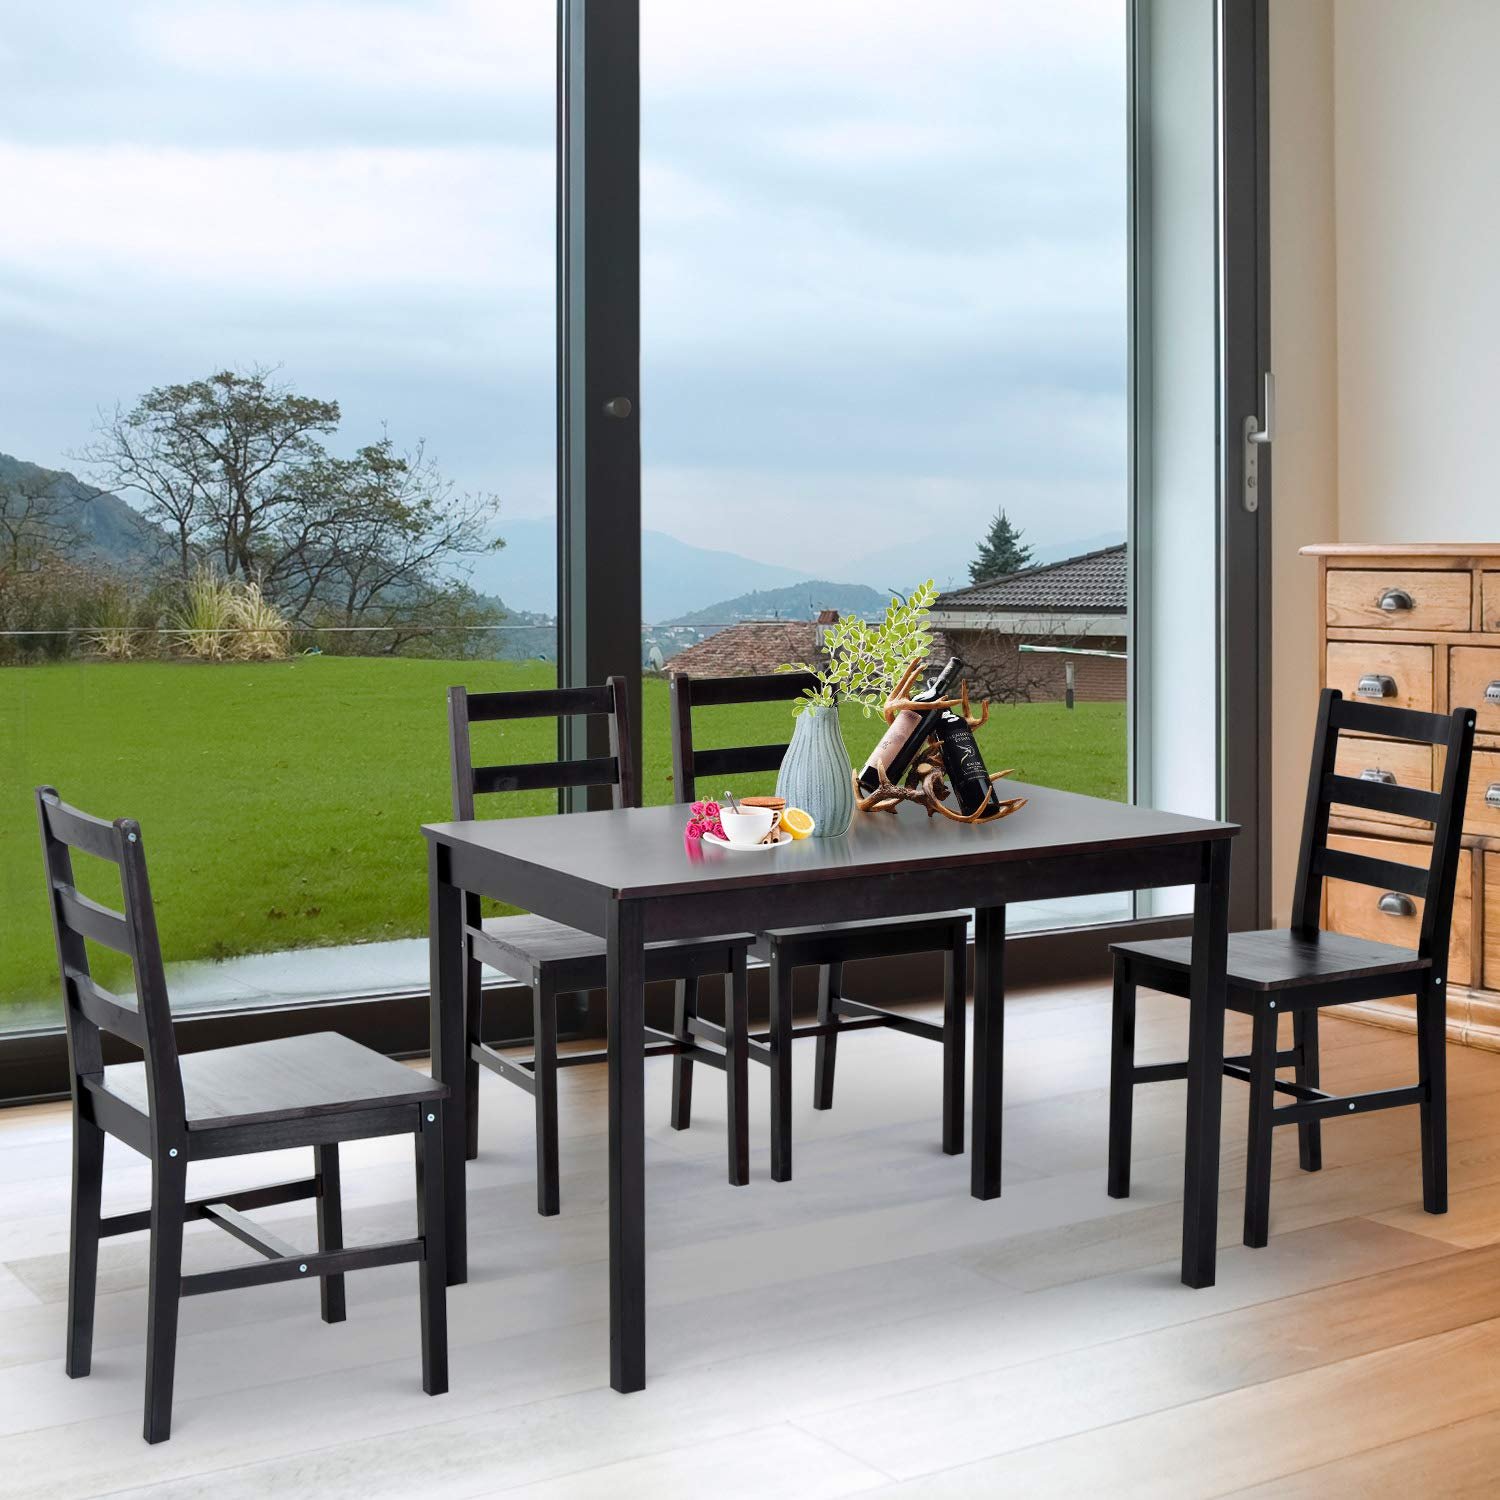 Aigio Wooden 4 Seater Dining Table Set